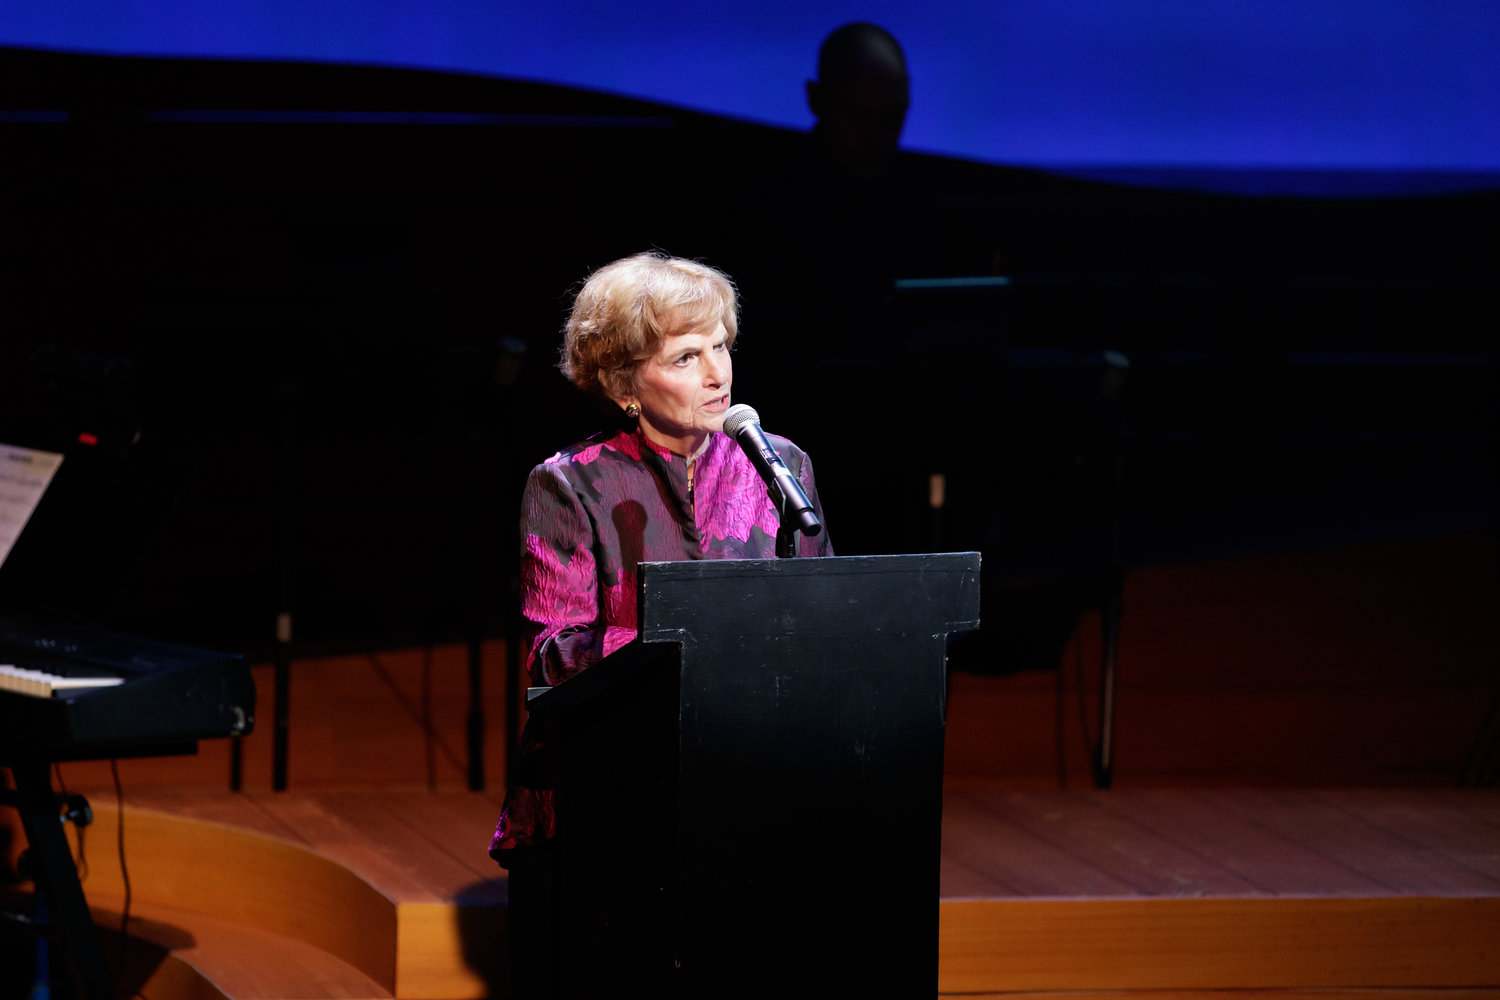 Cape Fear Regional Theater welcomes guests following phase one of renovations and introduces phase two on February 20, 2022.  Olga "Bo'' Thorp gives closing remarks. Thorp died Friday at age 89.